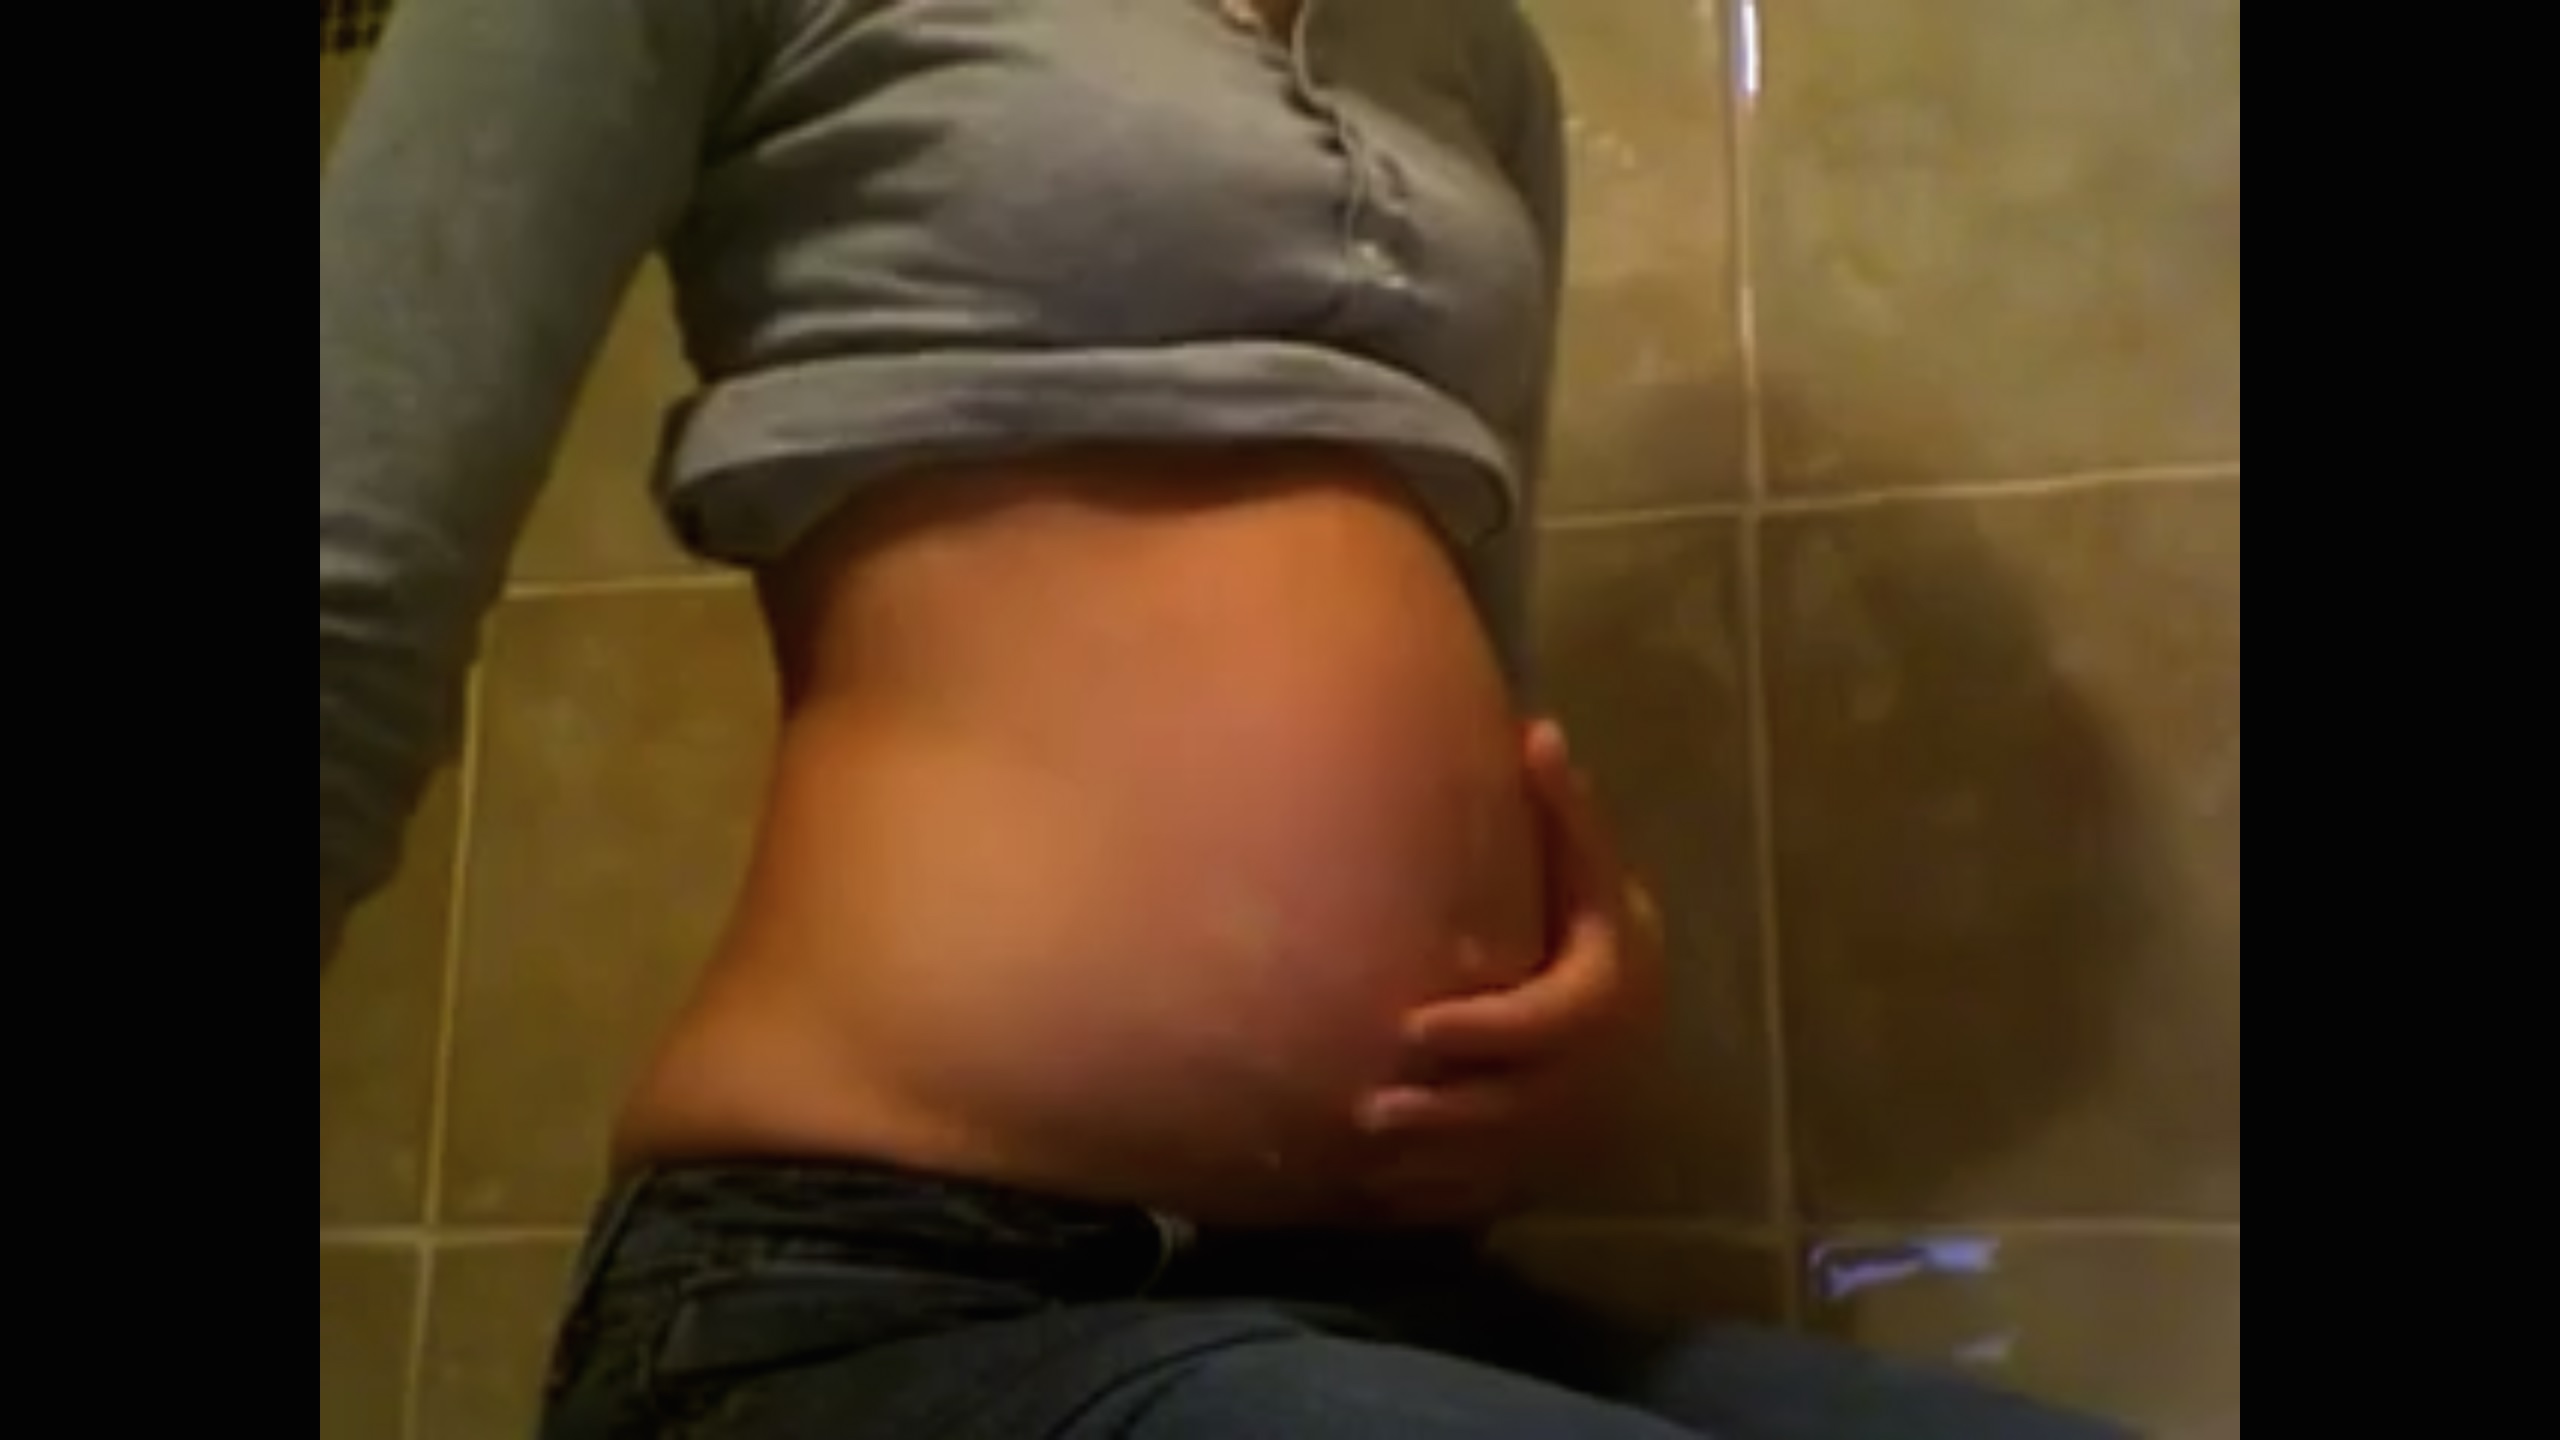 Bloated belly, rare old video